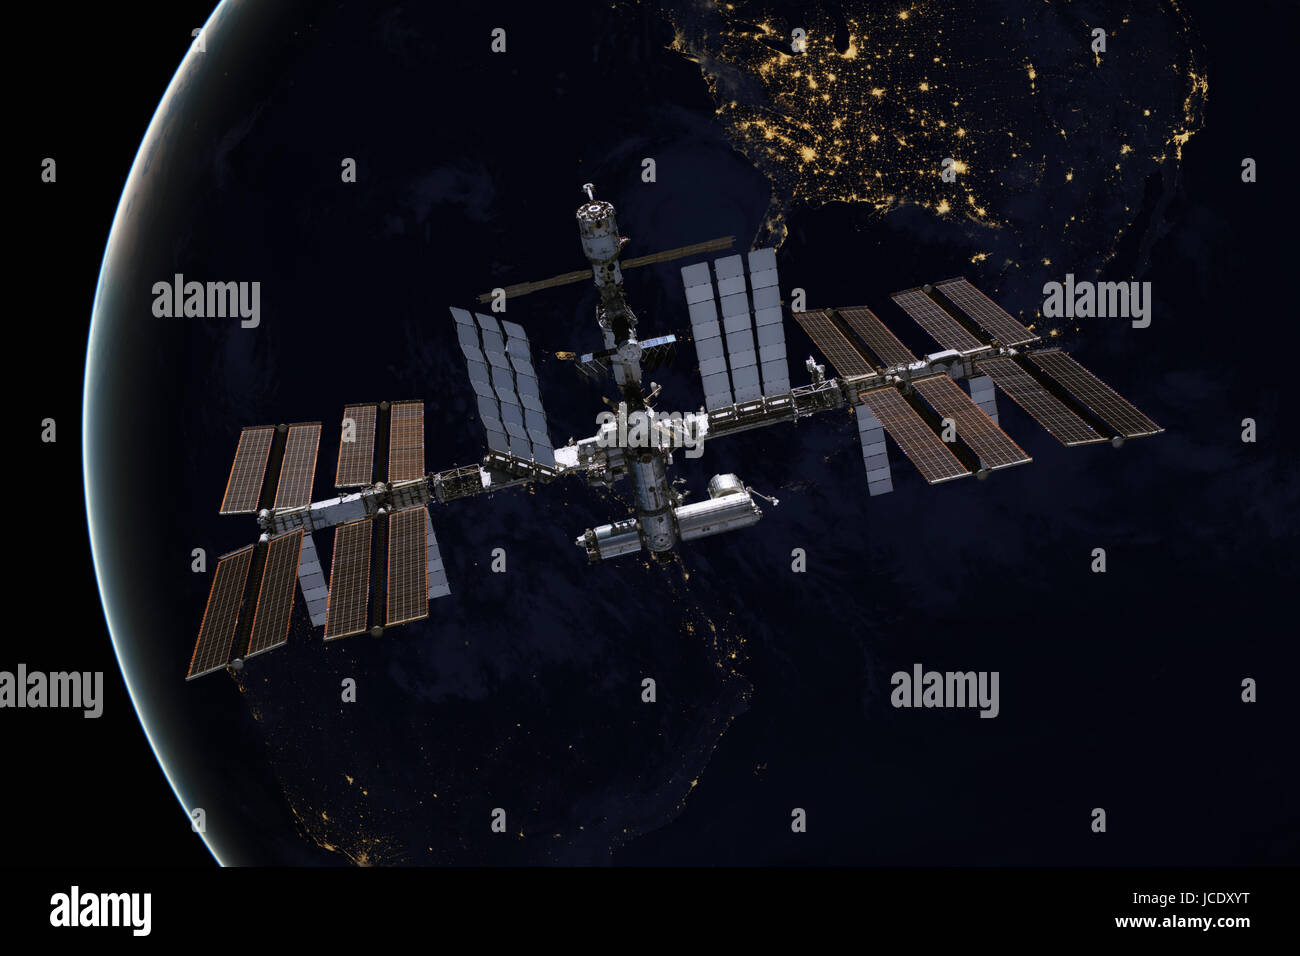 International Space Station over the planet Earth. Elements of this image furnished by NASA. Stock Photo